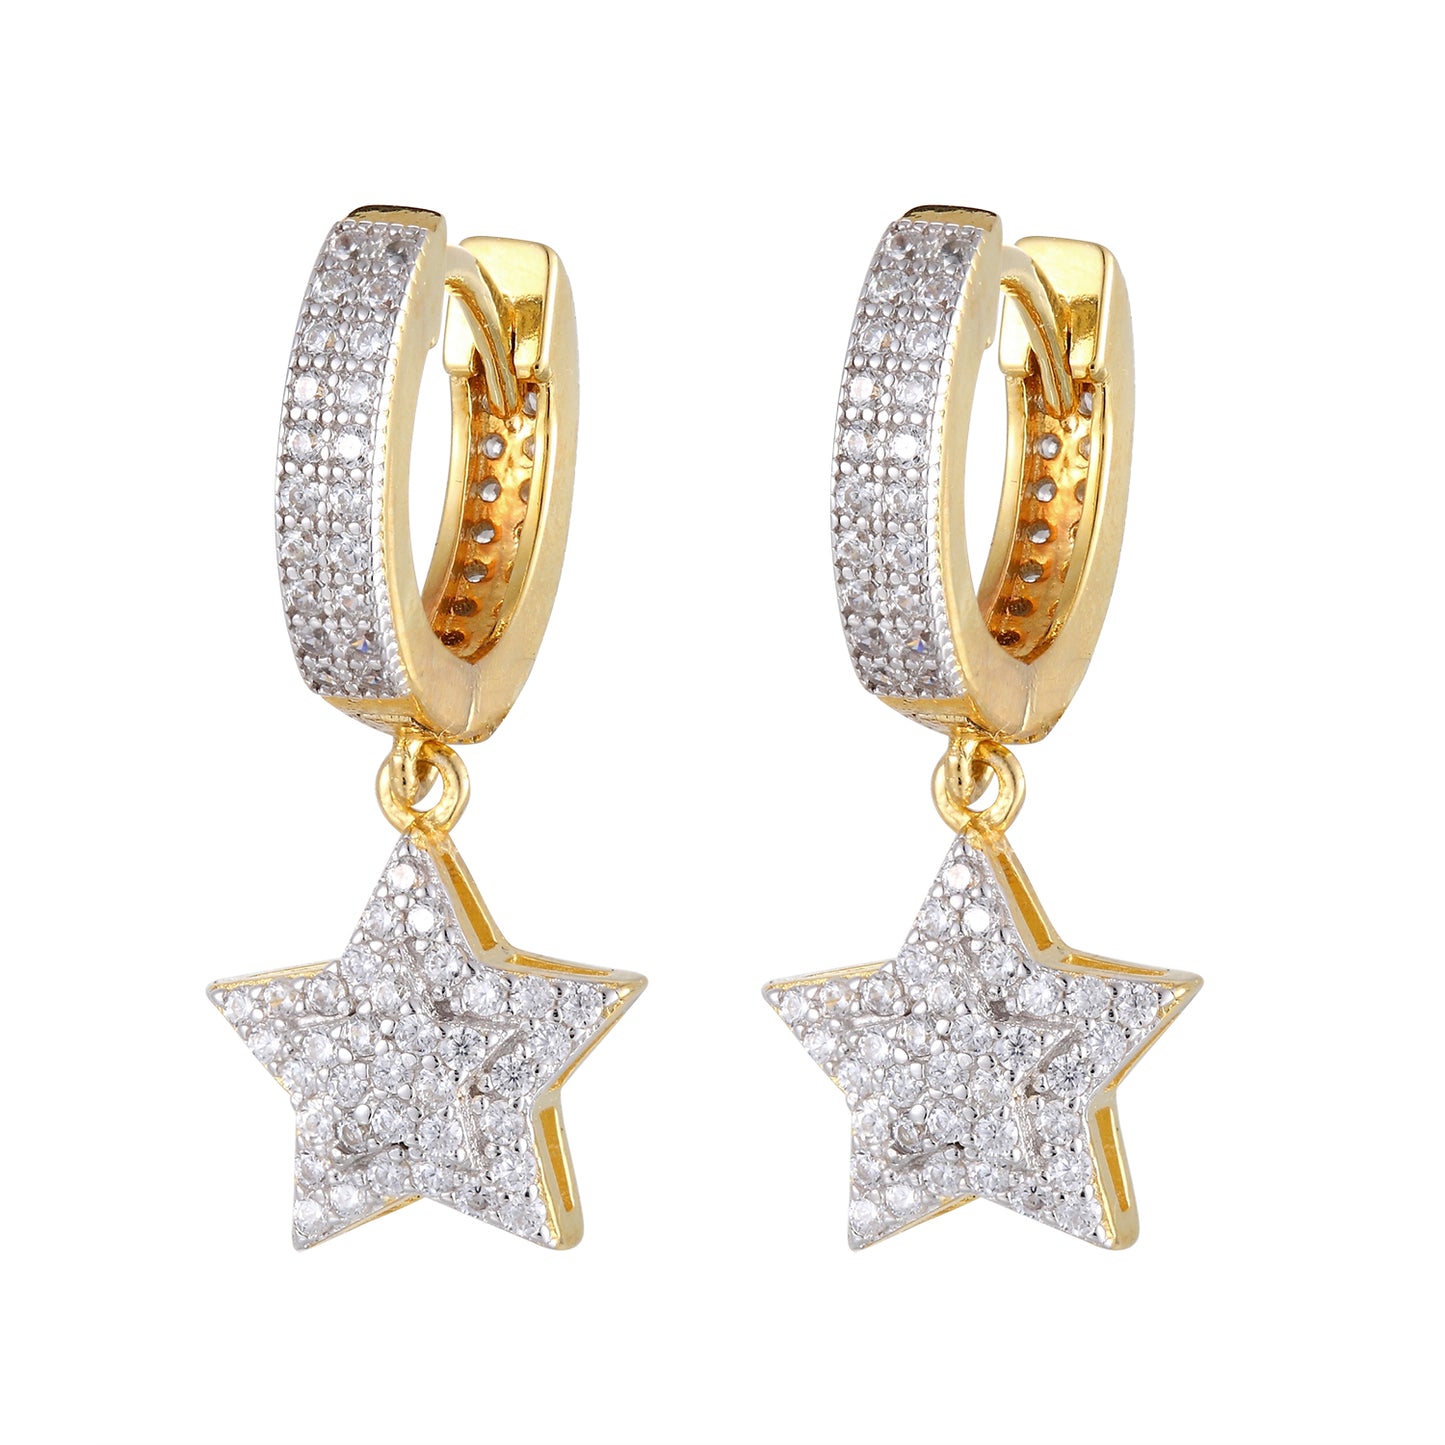 Dangling Star Hoops Micro Pave Silver Gold Tone Earrings